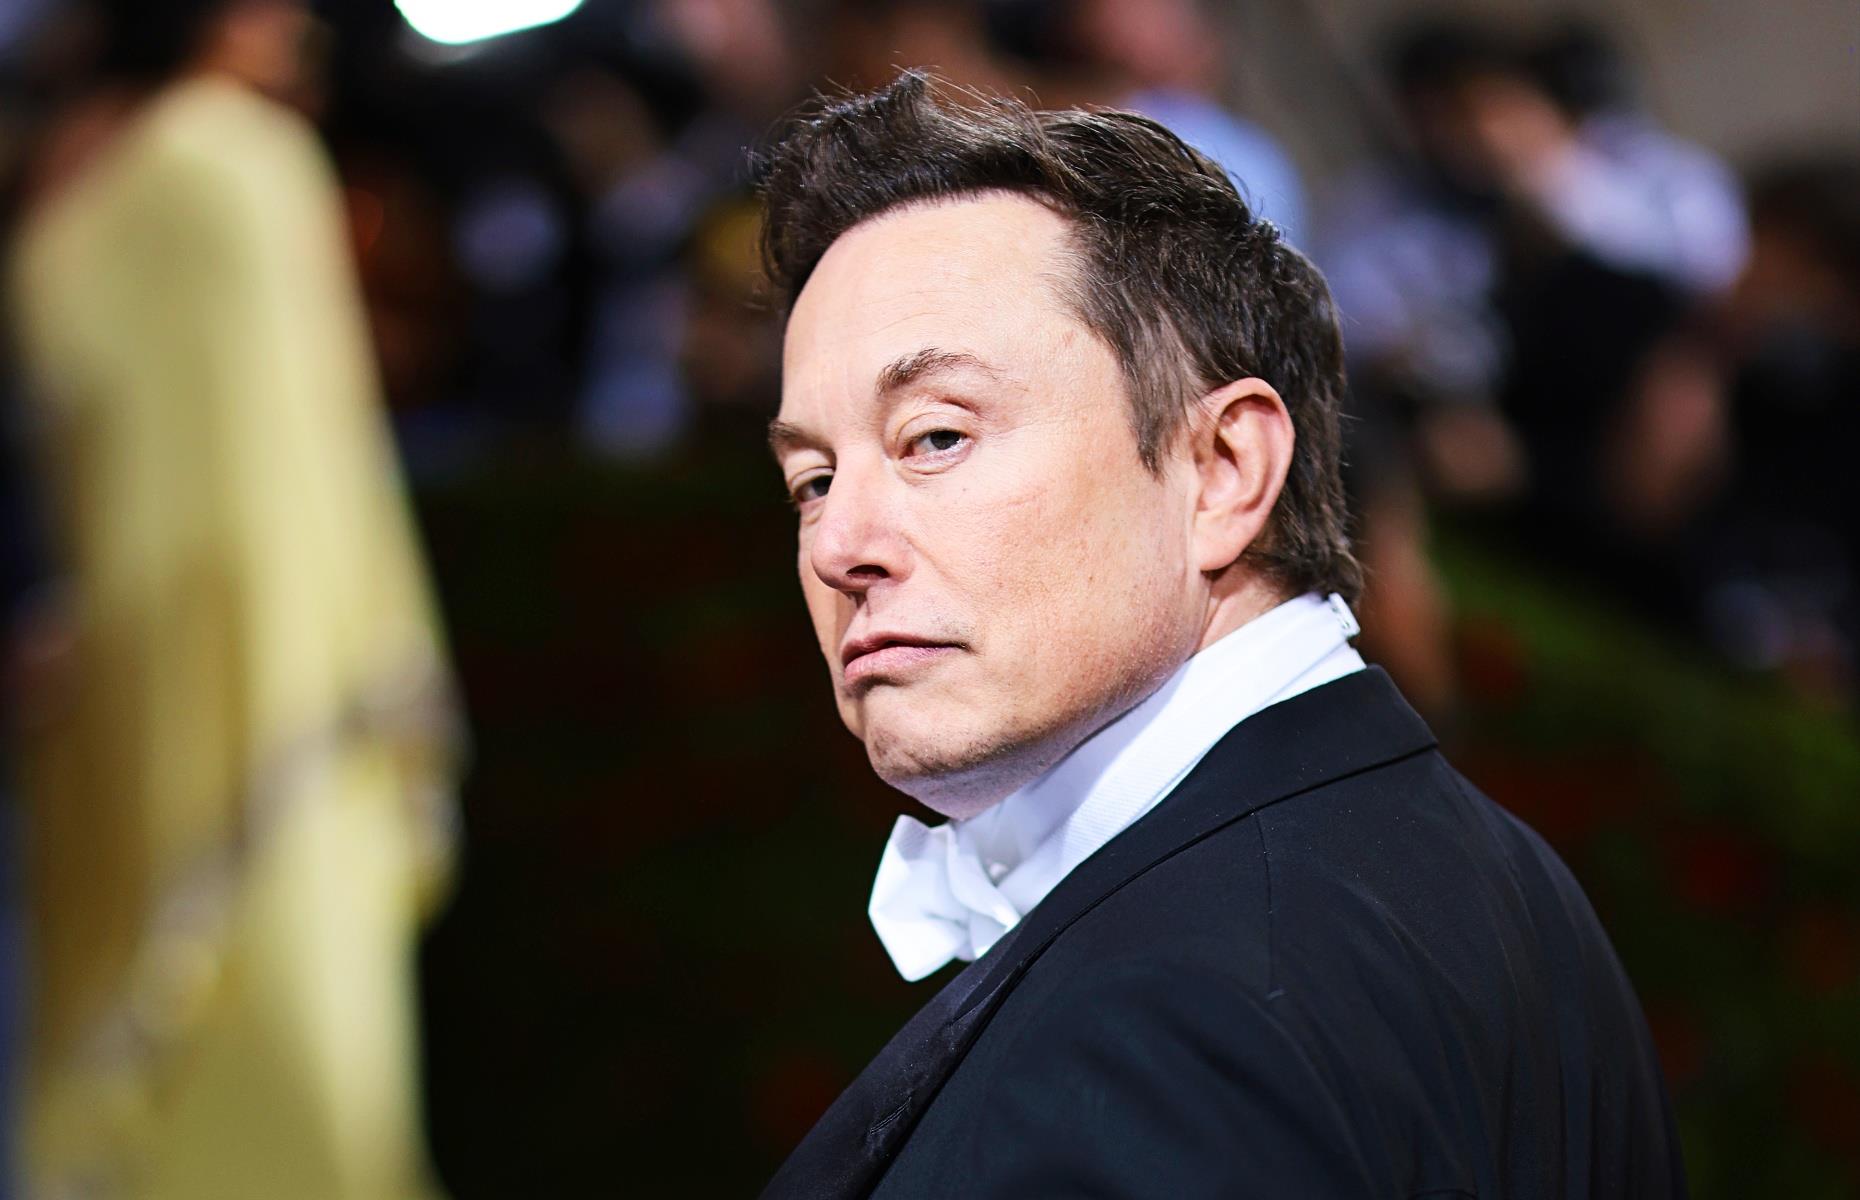 <p>Musk tweeting that Tesla's stock price was too high wasn't the first time he's shot himself in the foot. In fact, the eccentric billionaire seems to have a talent for self-sabotage.</p>  <p>In September 2018, he smoked a cannabis-tobacco joint on the <em>Joe Rogan Experience</em> podcast, resulting in outrage – and another fall in Tesla's stock value.</p>  <p>More recently, Musk has described his Tesla Gigafactories as "gigantic money furnaces," stating that they're losing billions of dollars as a result of supply chain issues and EV battery shortages. </p>  <p>Given how much he talks down the business, it's not clear how much Musk is really concerned about Tesla's stock market success...</p>